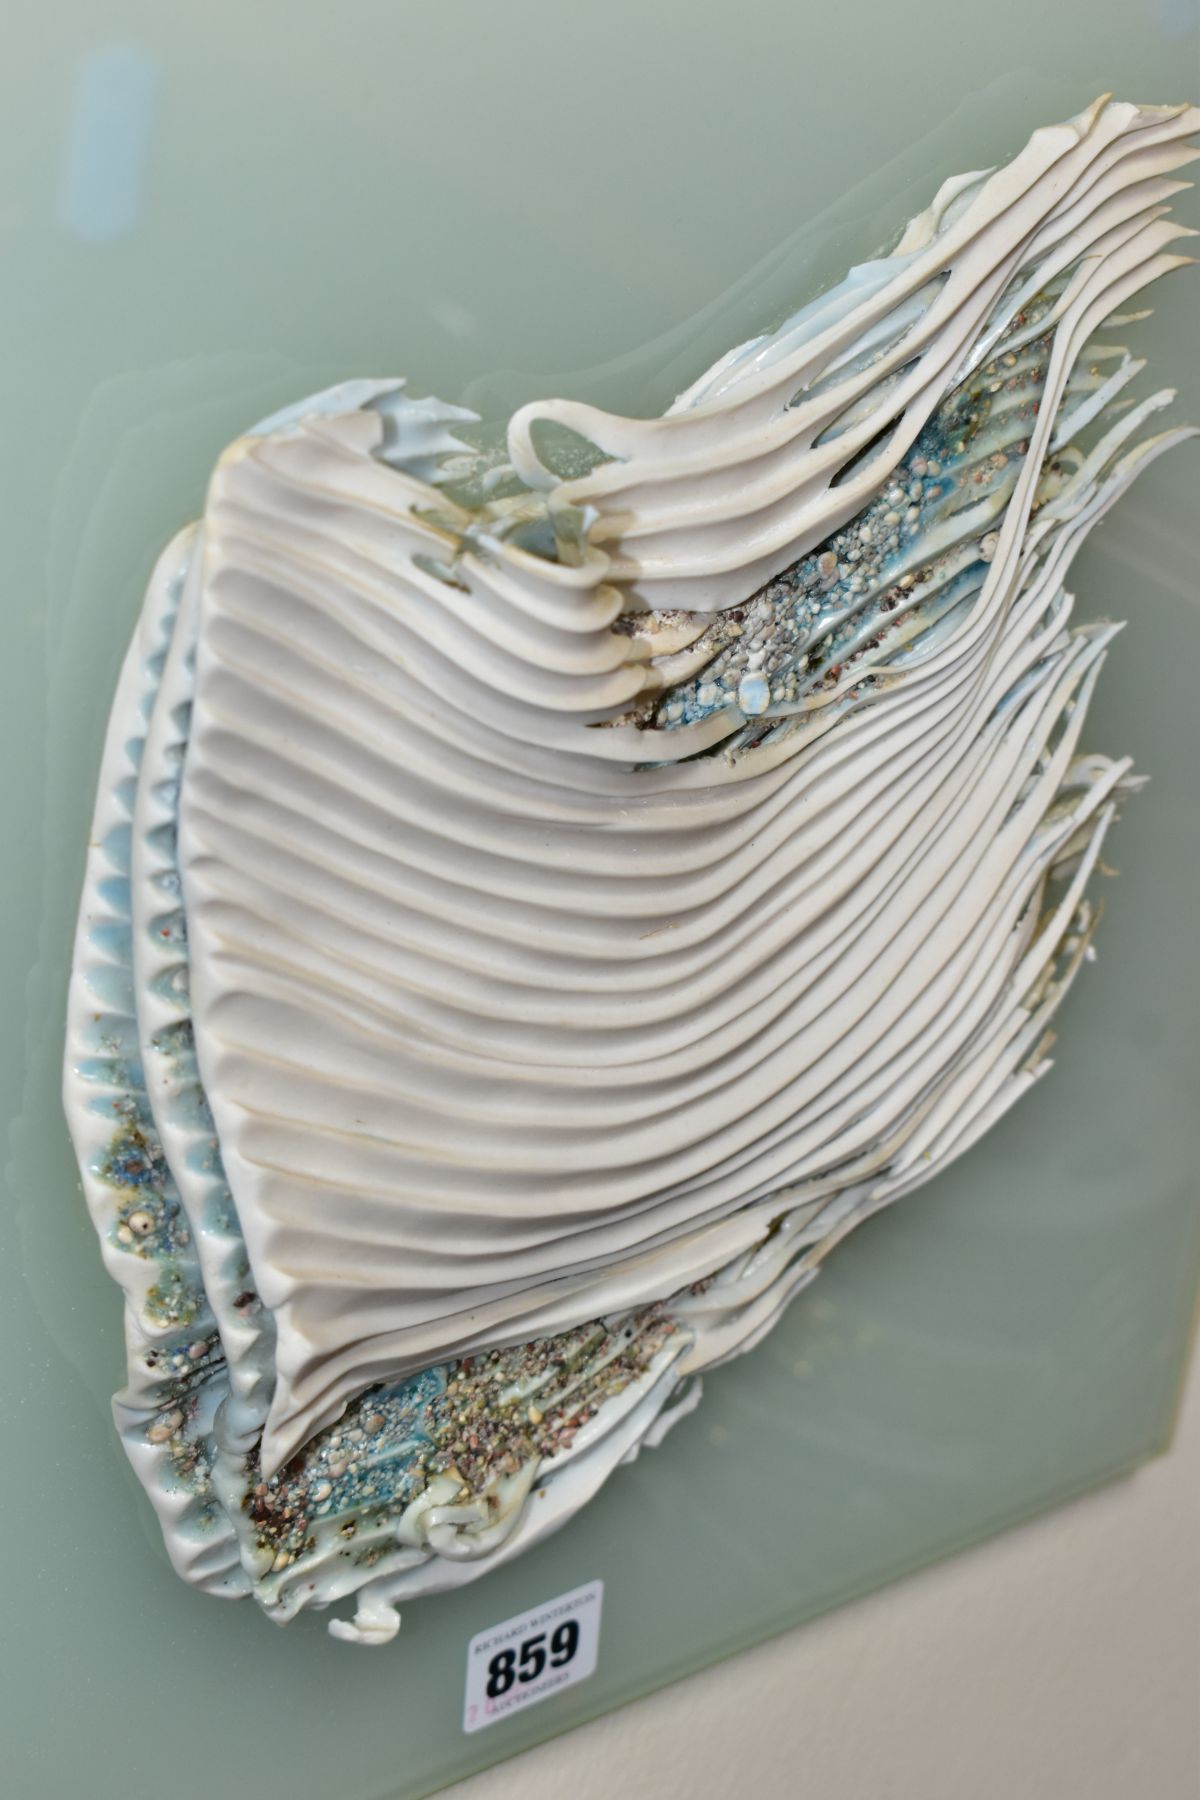 JENNY BEAVEN (BRITISH CONTEMPORARY) 'ENERGISED WATER', a mixed media wall hanging sculpture - Image 2 of 3